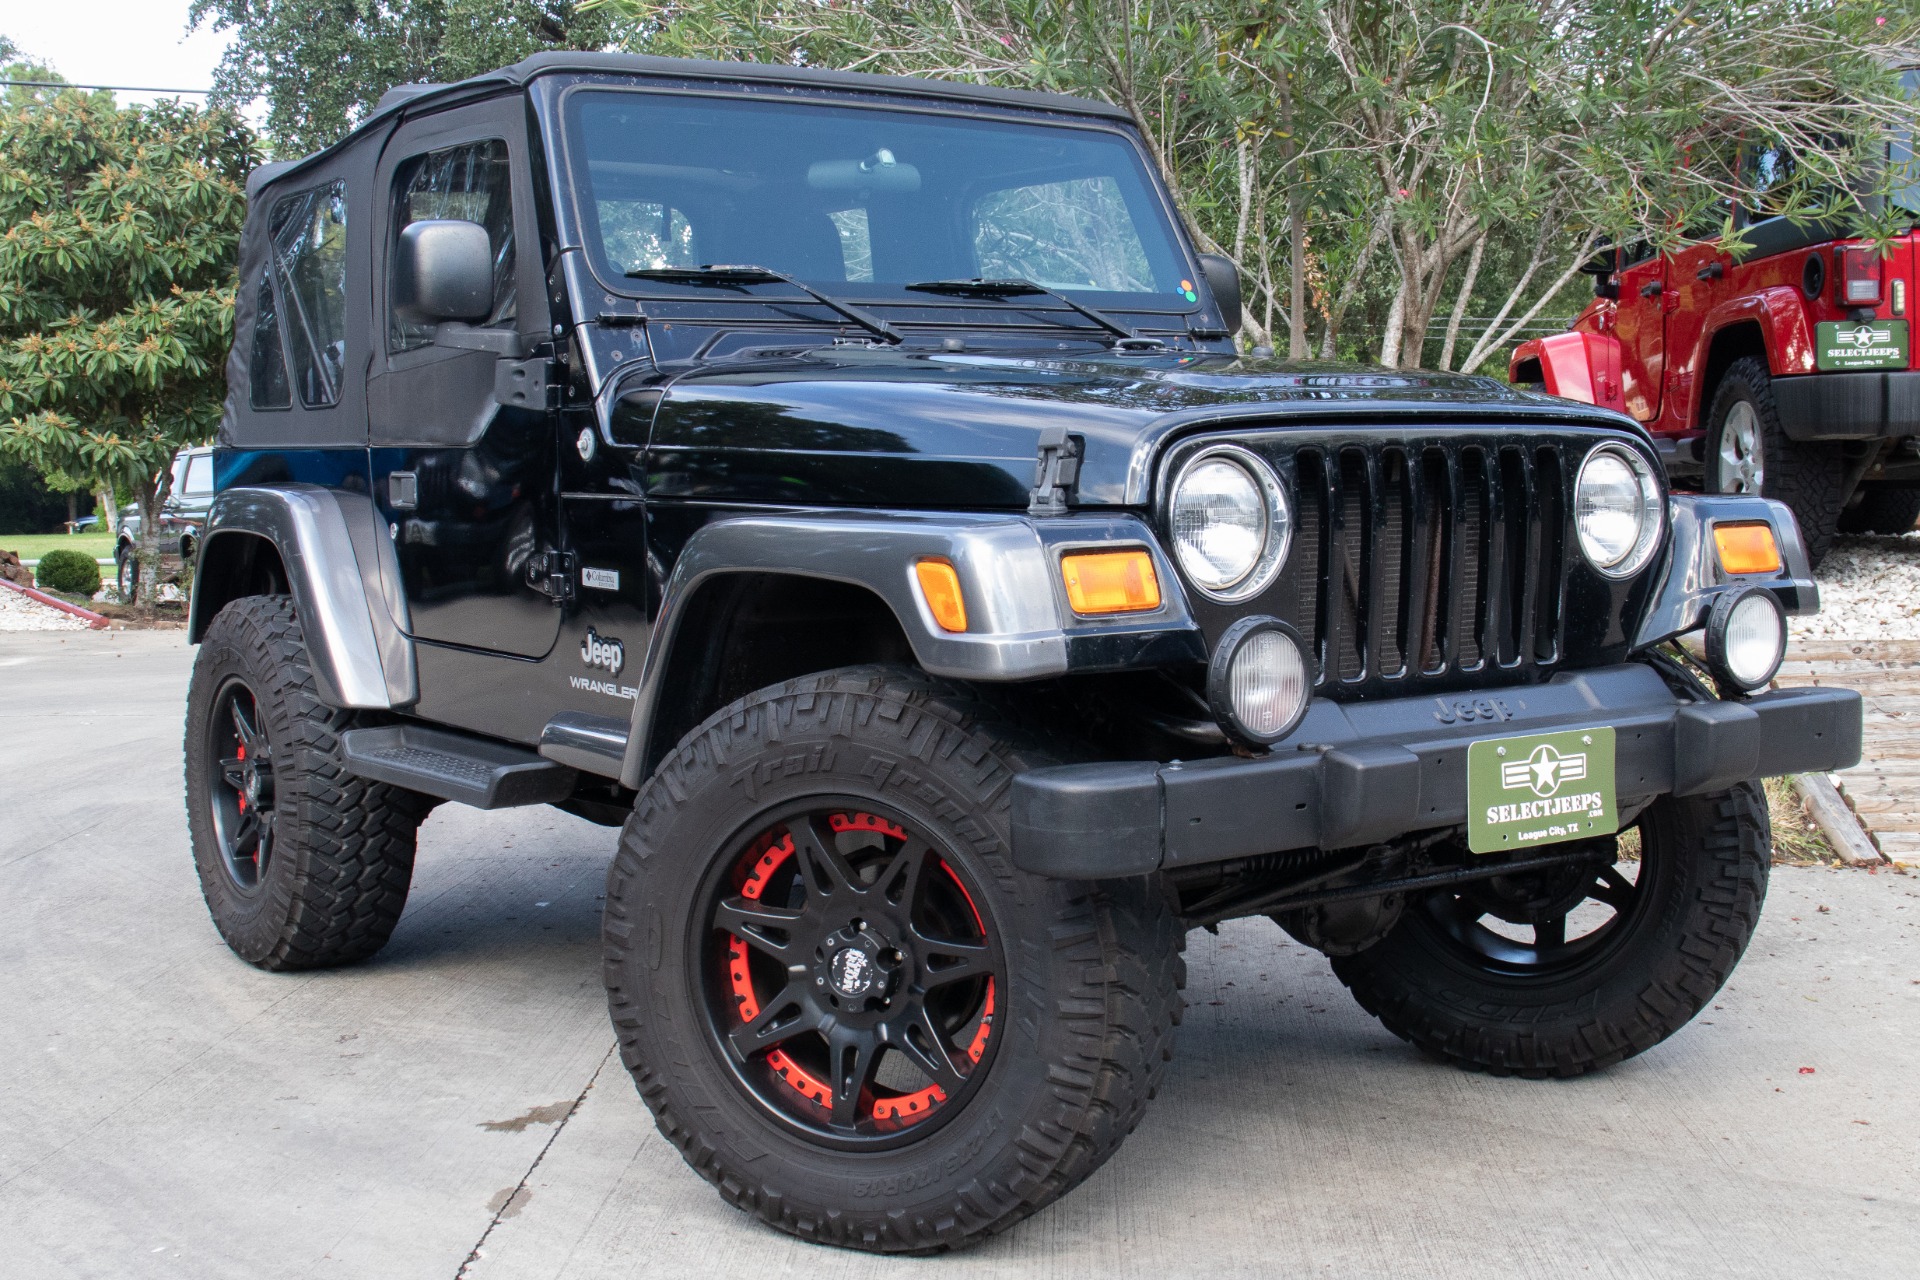 Used 2004 Jeep Wrangler X For Sale ($16,995) | Select Jeeps Inc. Stock  #725970